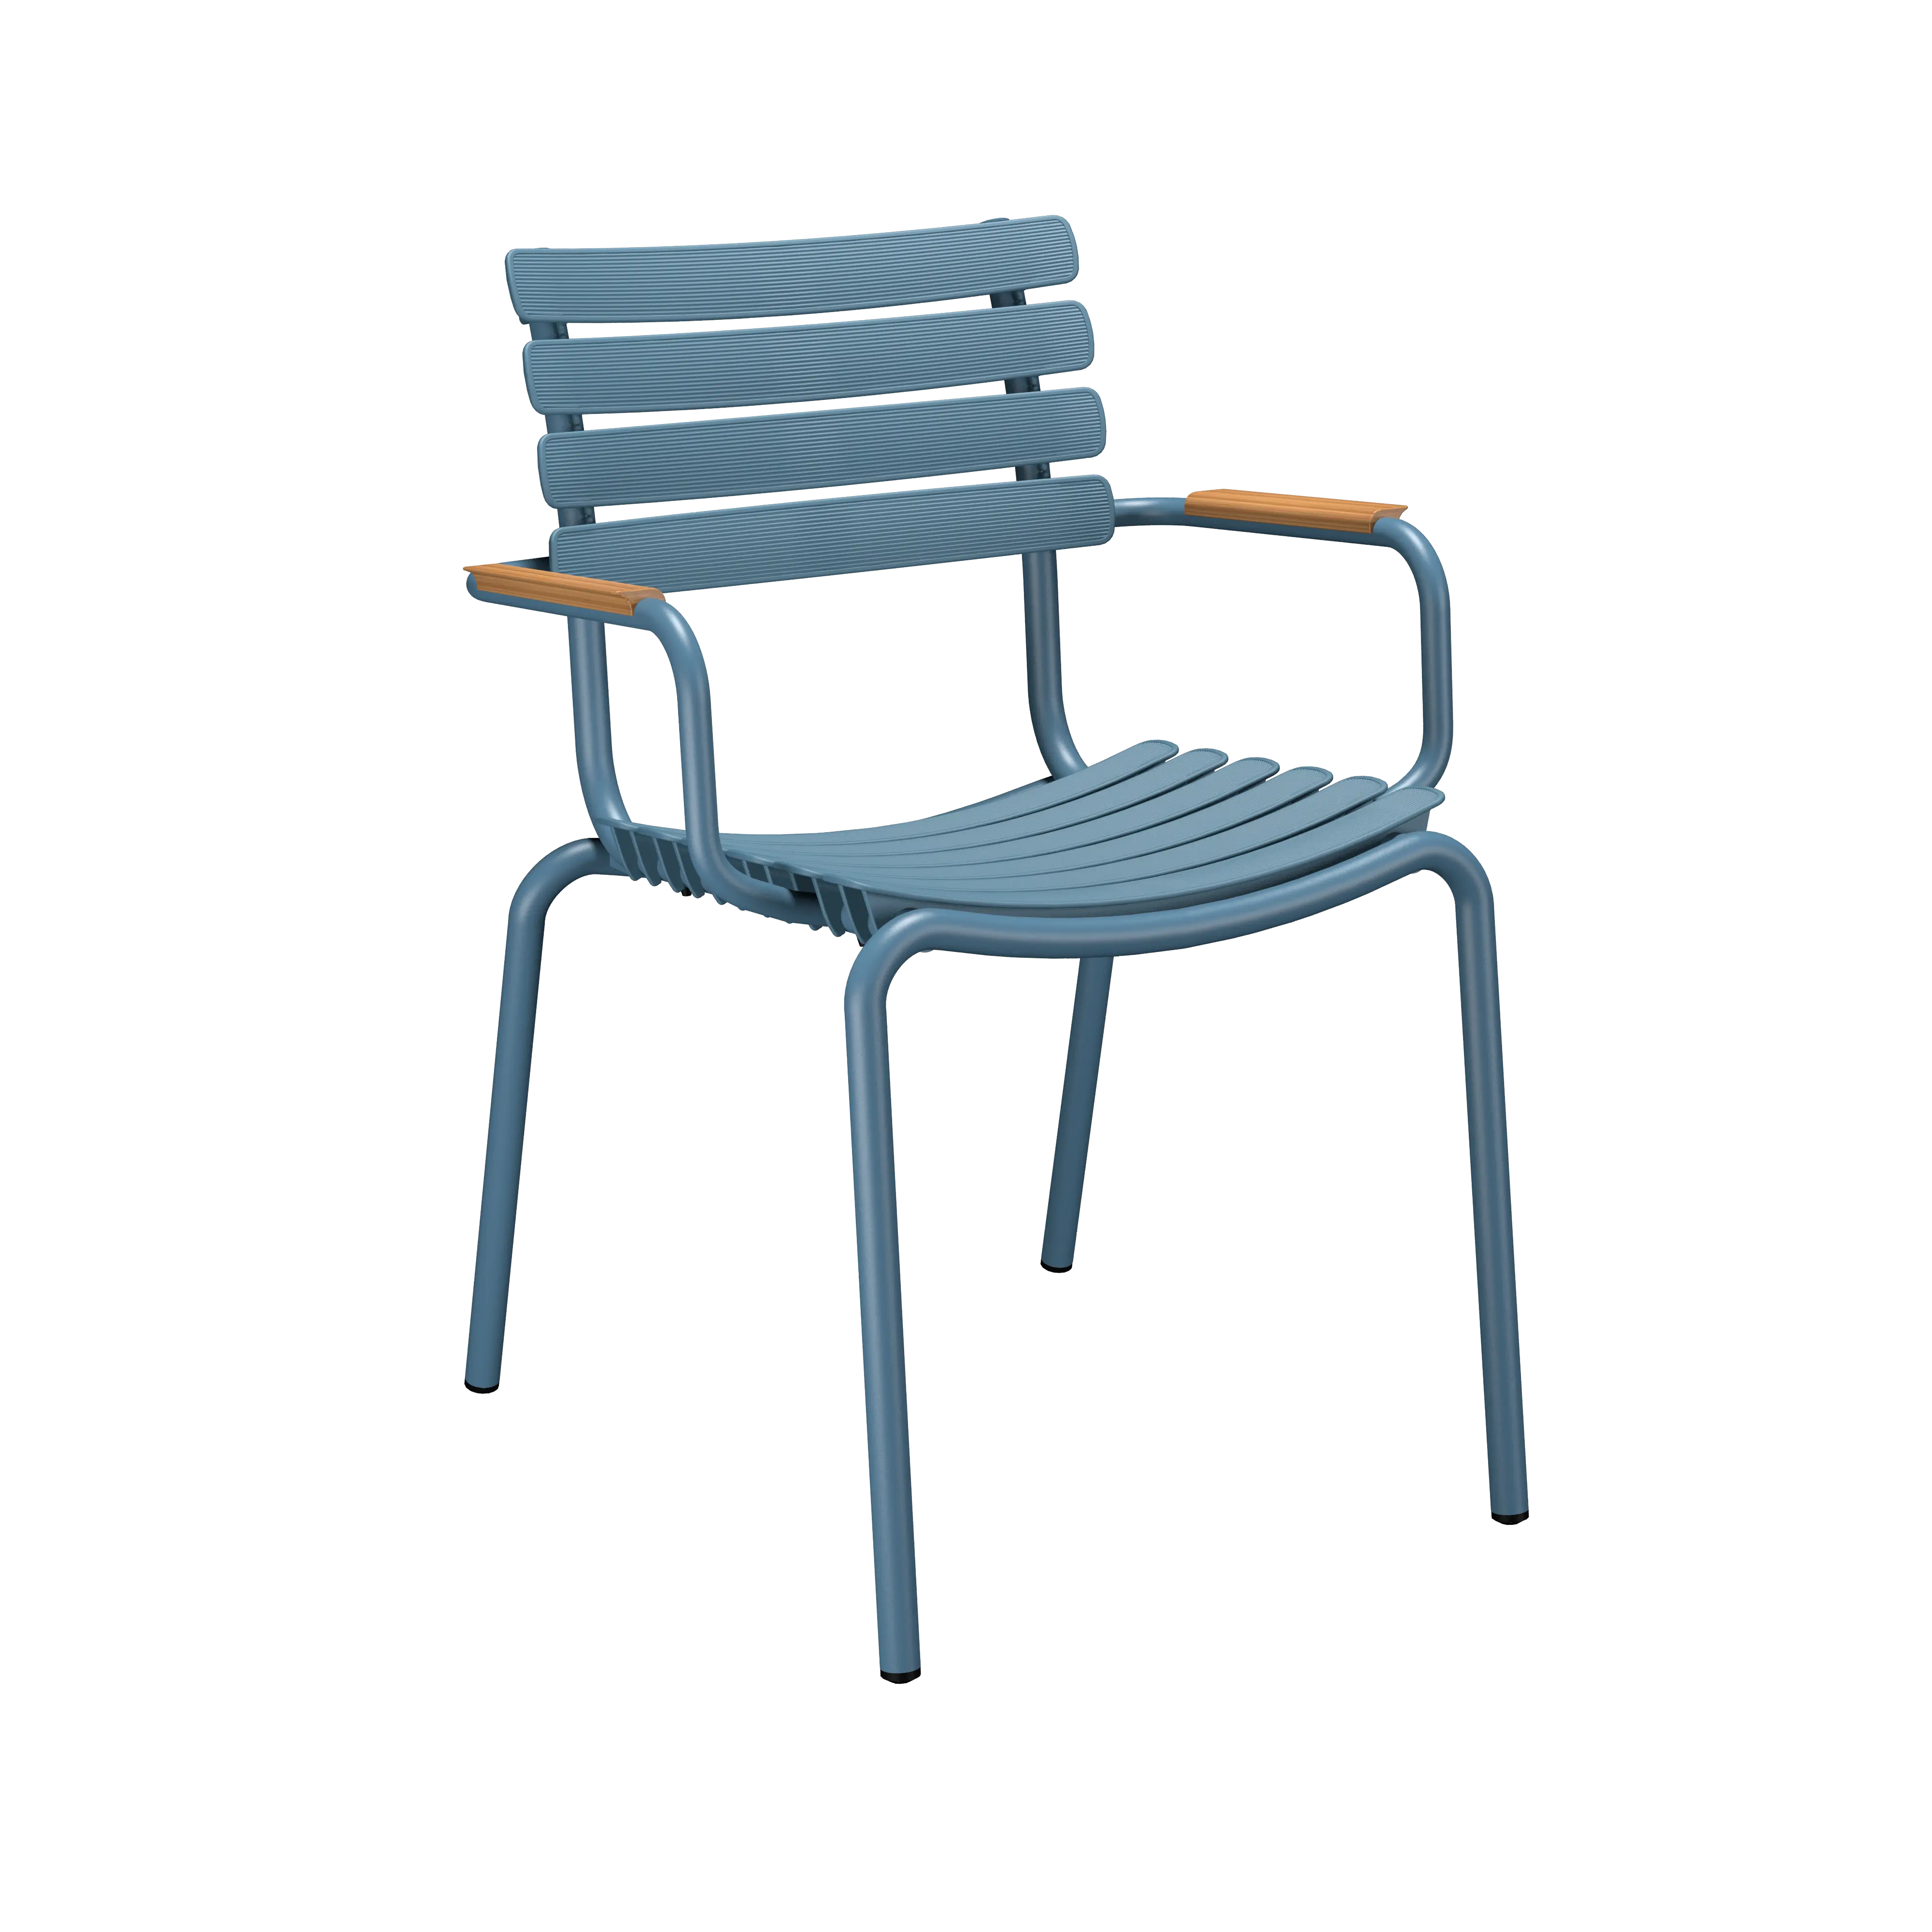 Reclips dining chair - Sky blue, bamboo armrests